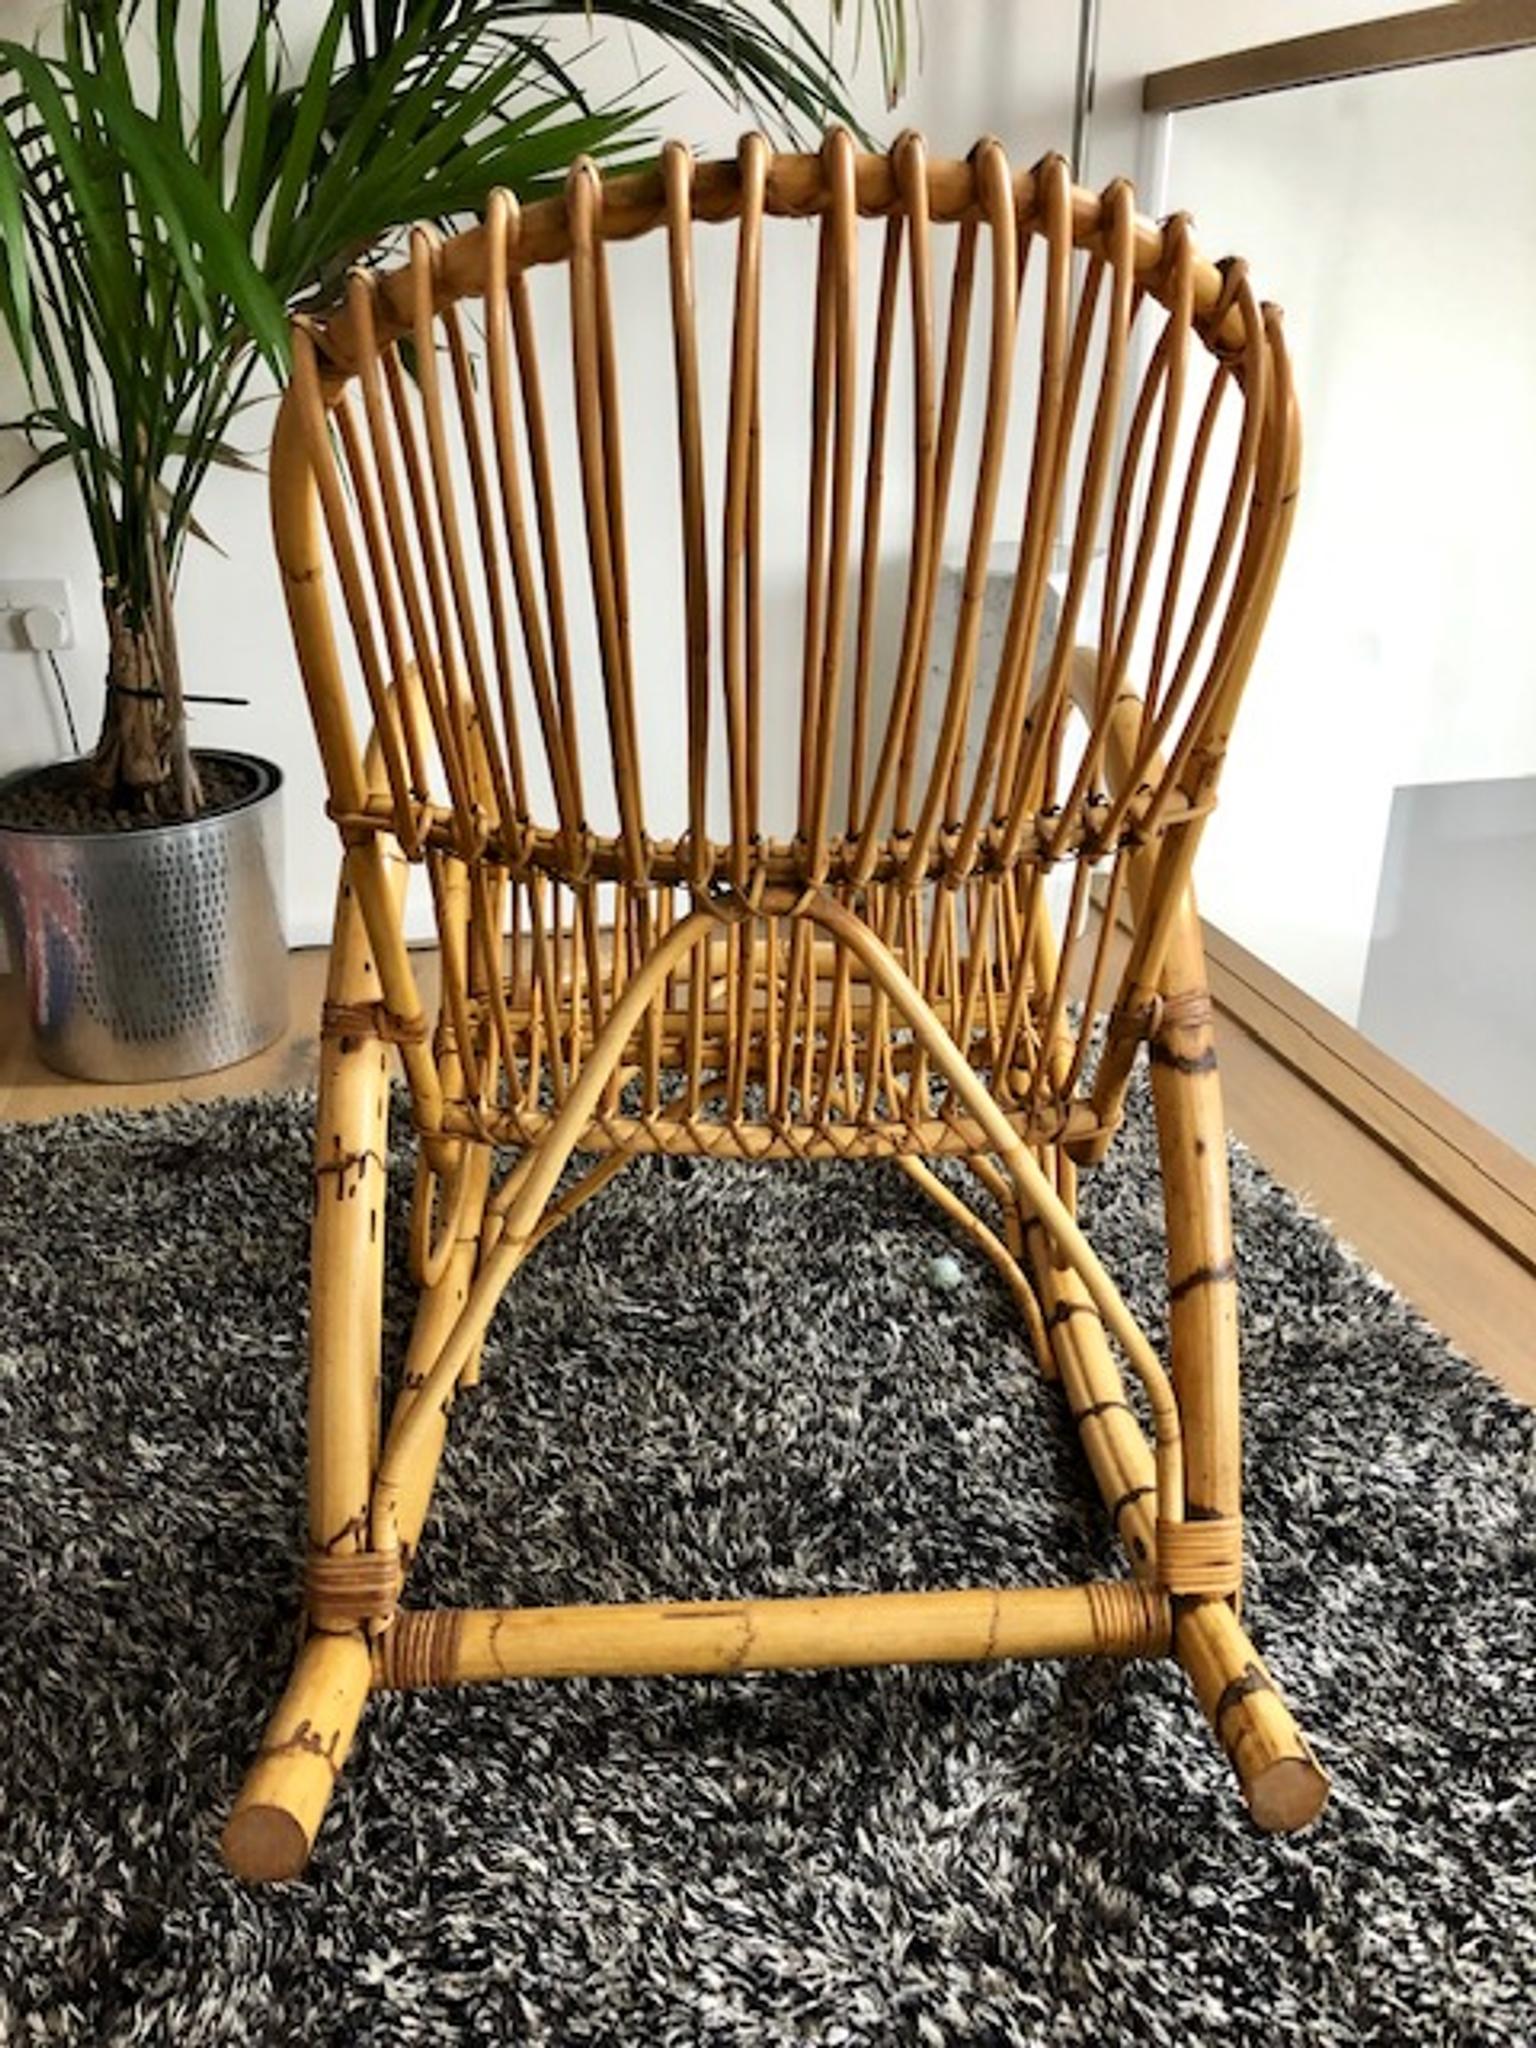 Bent Bamboo Rocking Chair By Franco Albini In Bn7 Lewes Fur 125 00